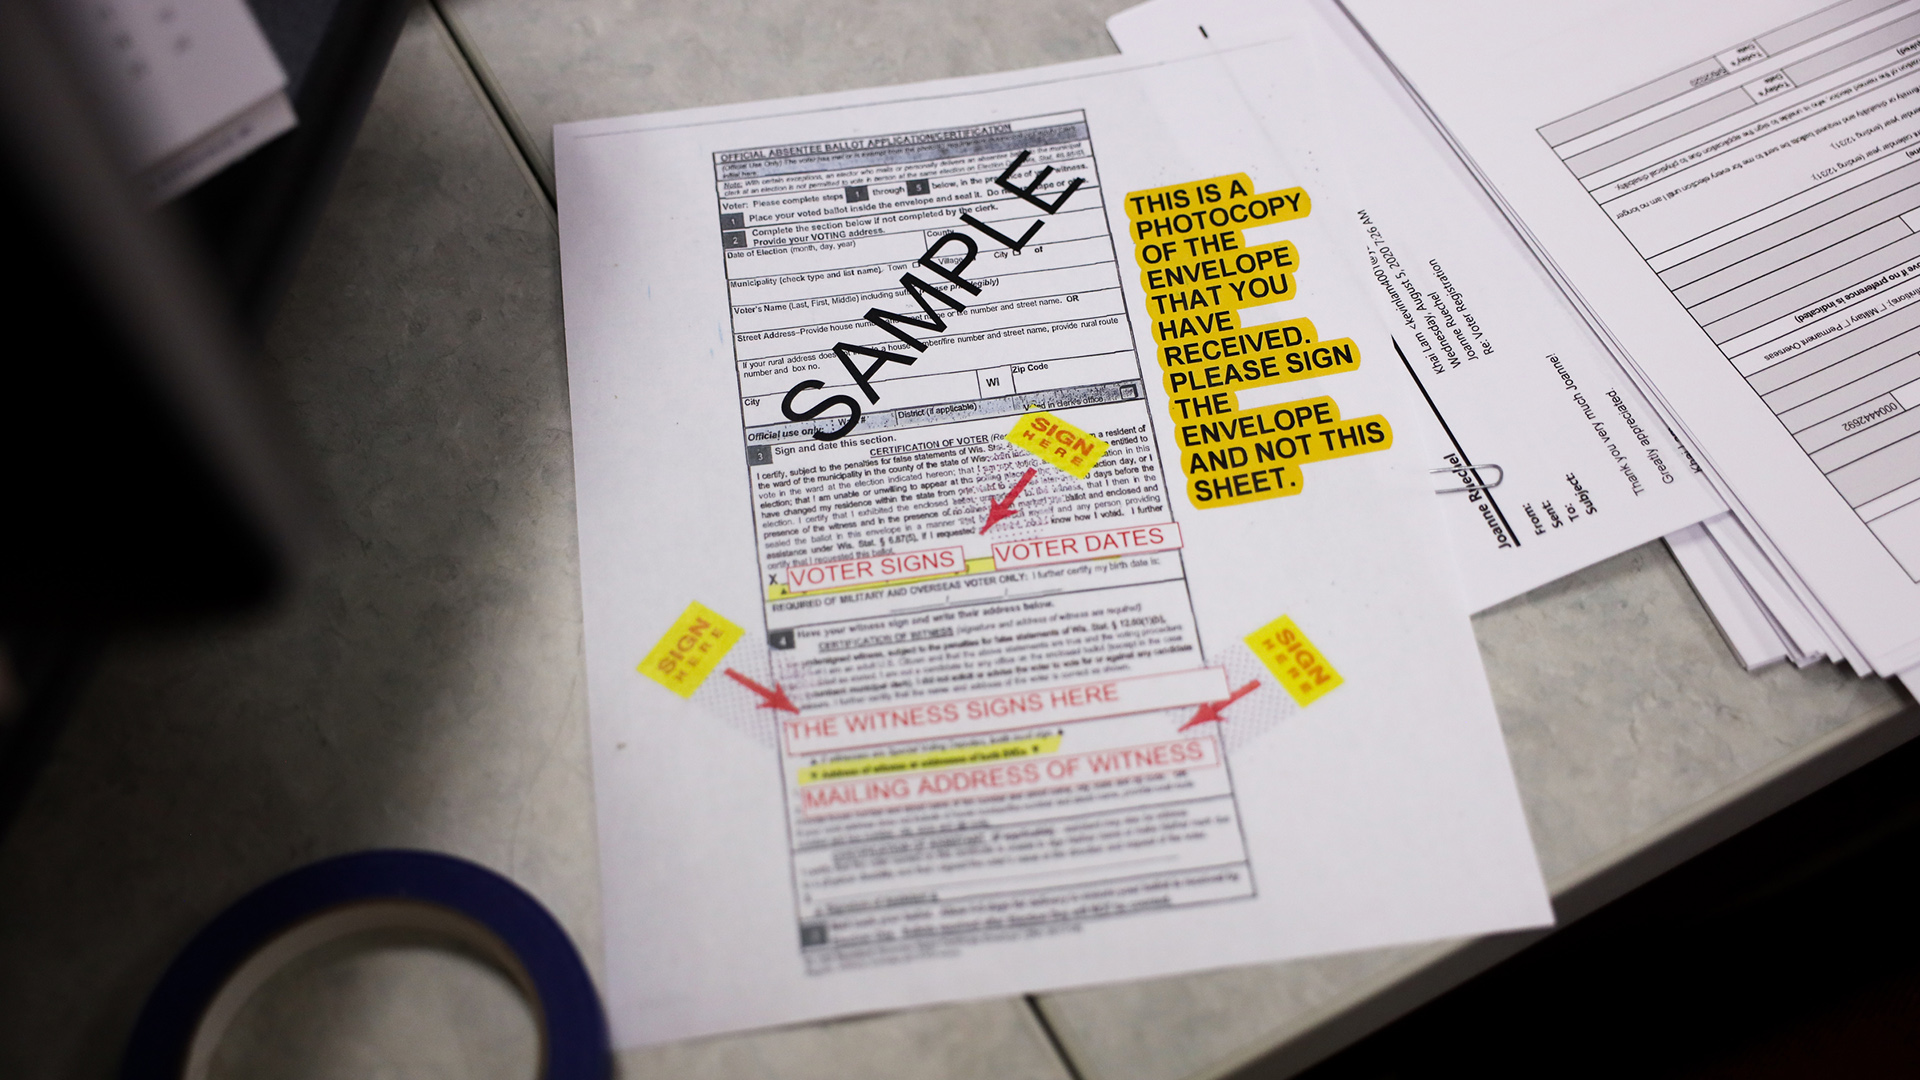 A sample ballot stamped with the word "SAMPLE" and highlighted instructions and stickers with arrows pointing toward documentation fields sits on a desk.